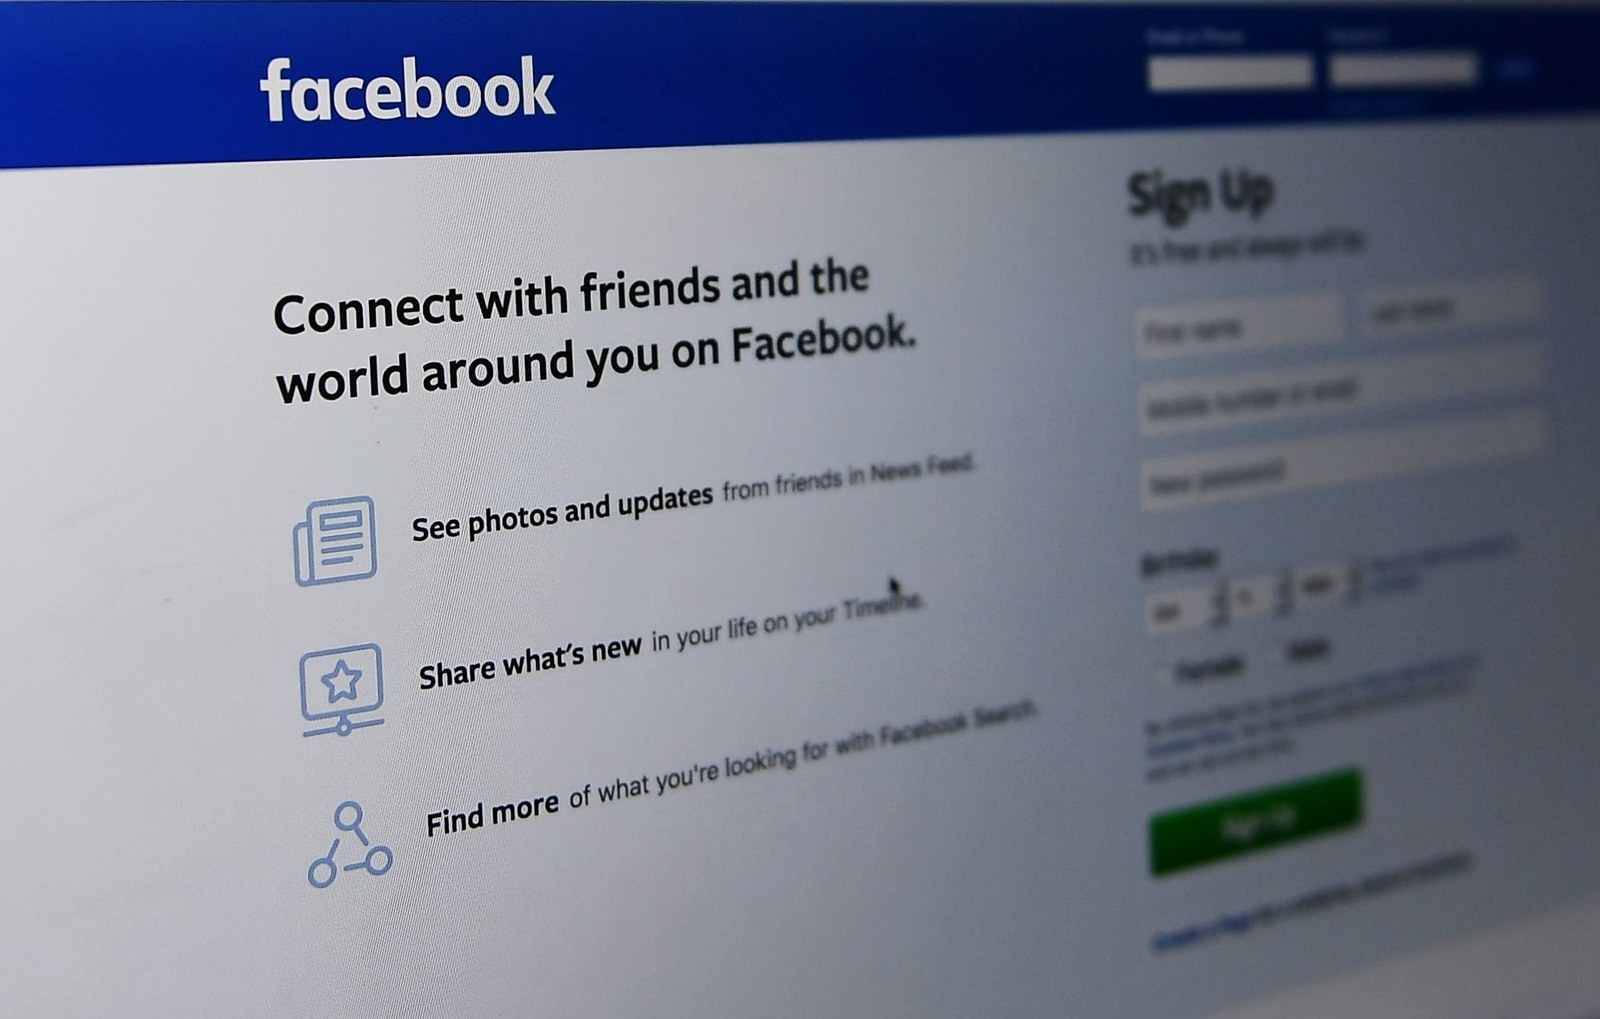 Did someone break into your Facebook account? Check for this red flag